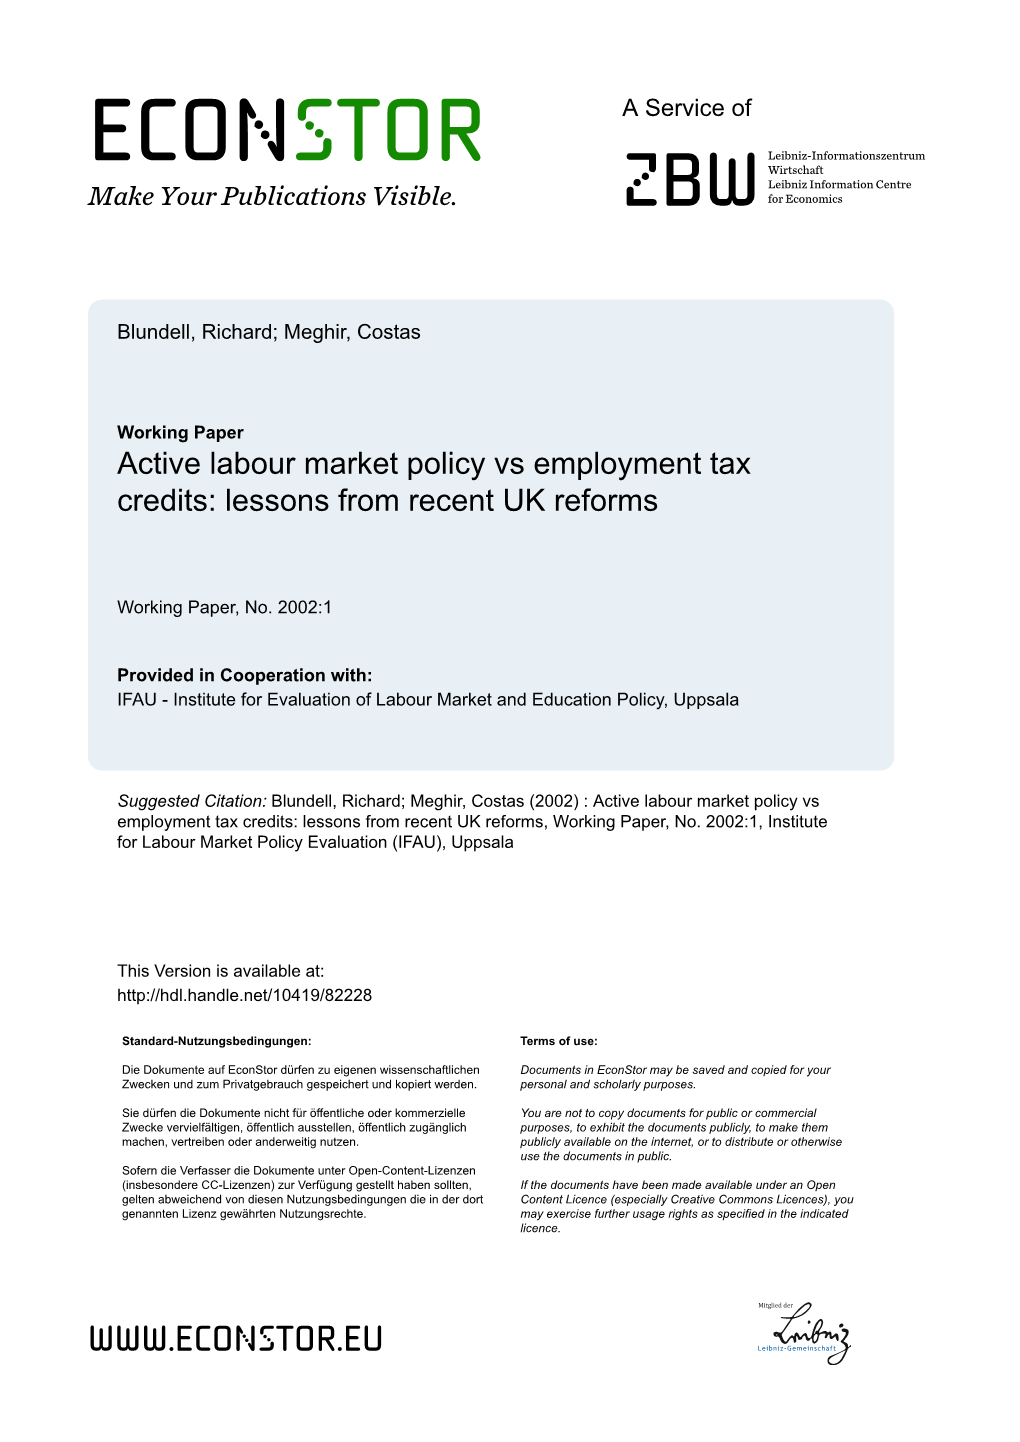 Active Labour Market Policy Vs Employment Tax Credits: Lessons from Recent UK Reforms